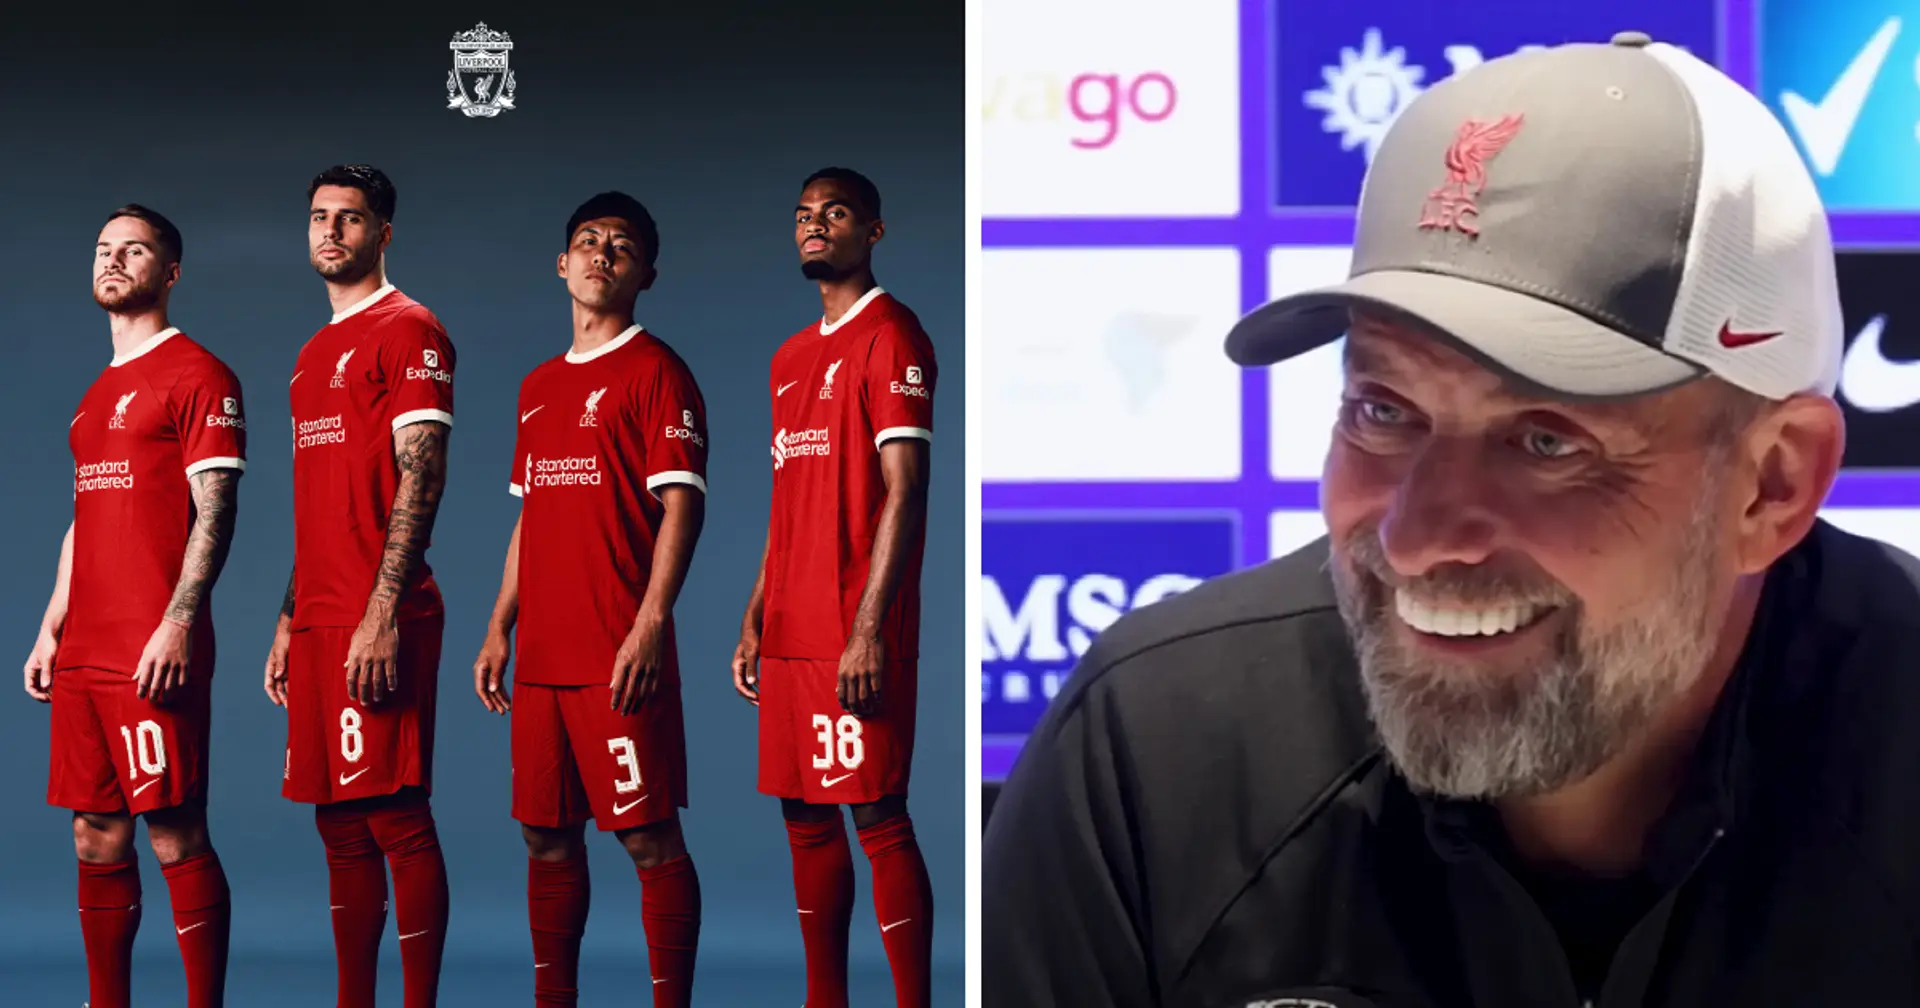 'I stood in the dressing room, had a look, and I love this team': Jurgen Klopp reflects on Liverpool's recent transfer business